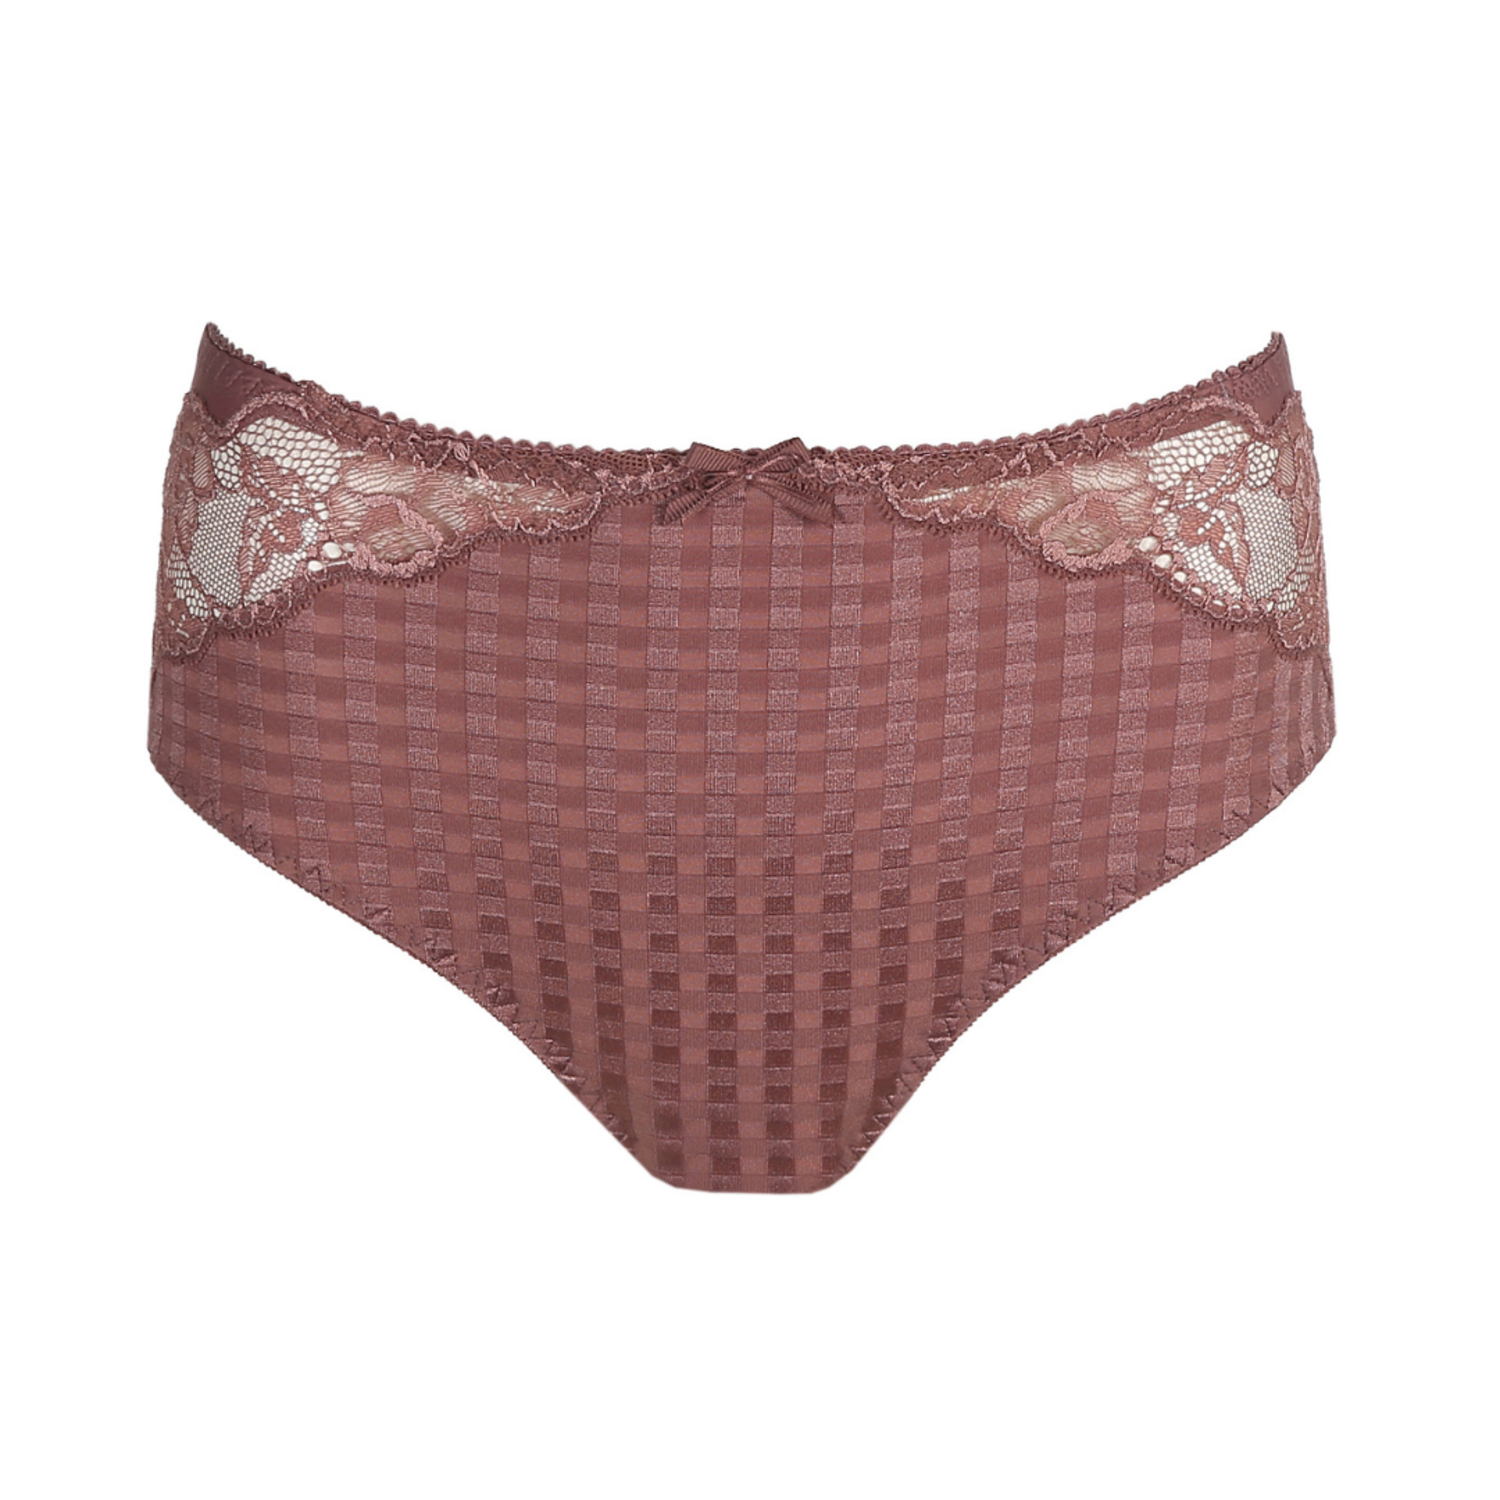 Photo of Lacy Underwear on Red Silky Fabric